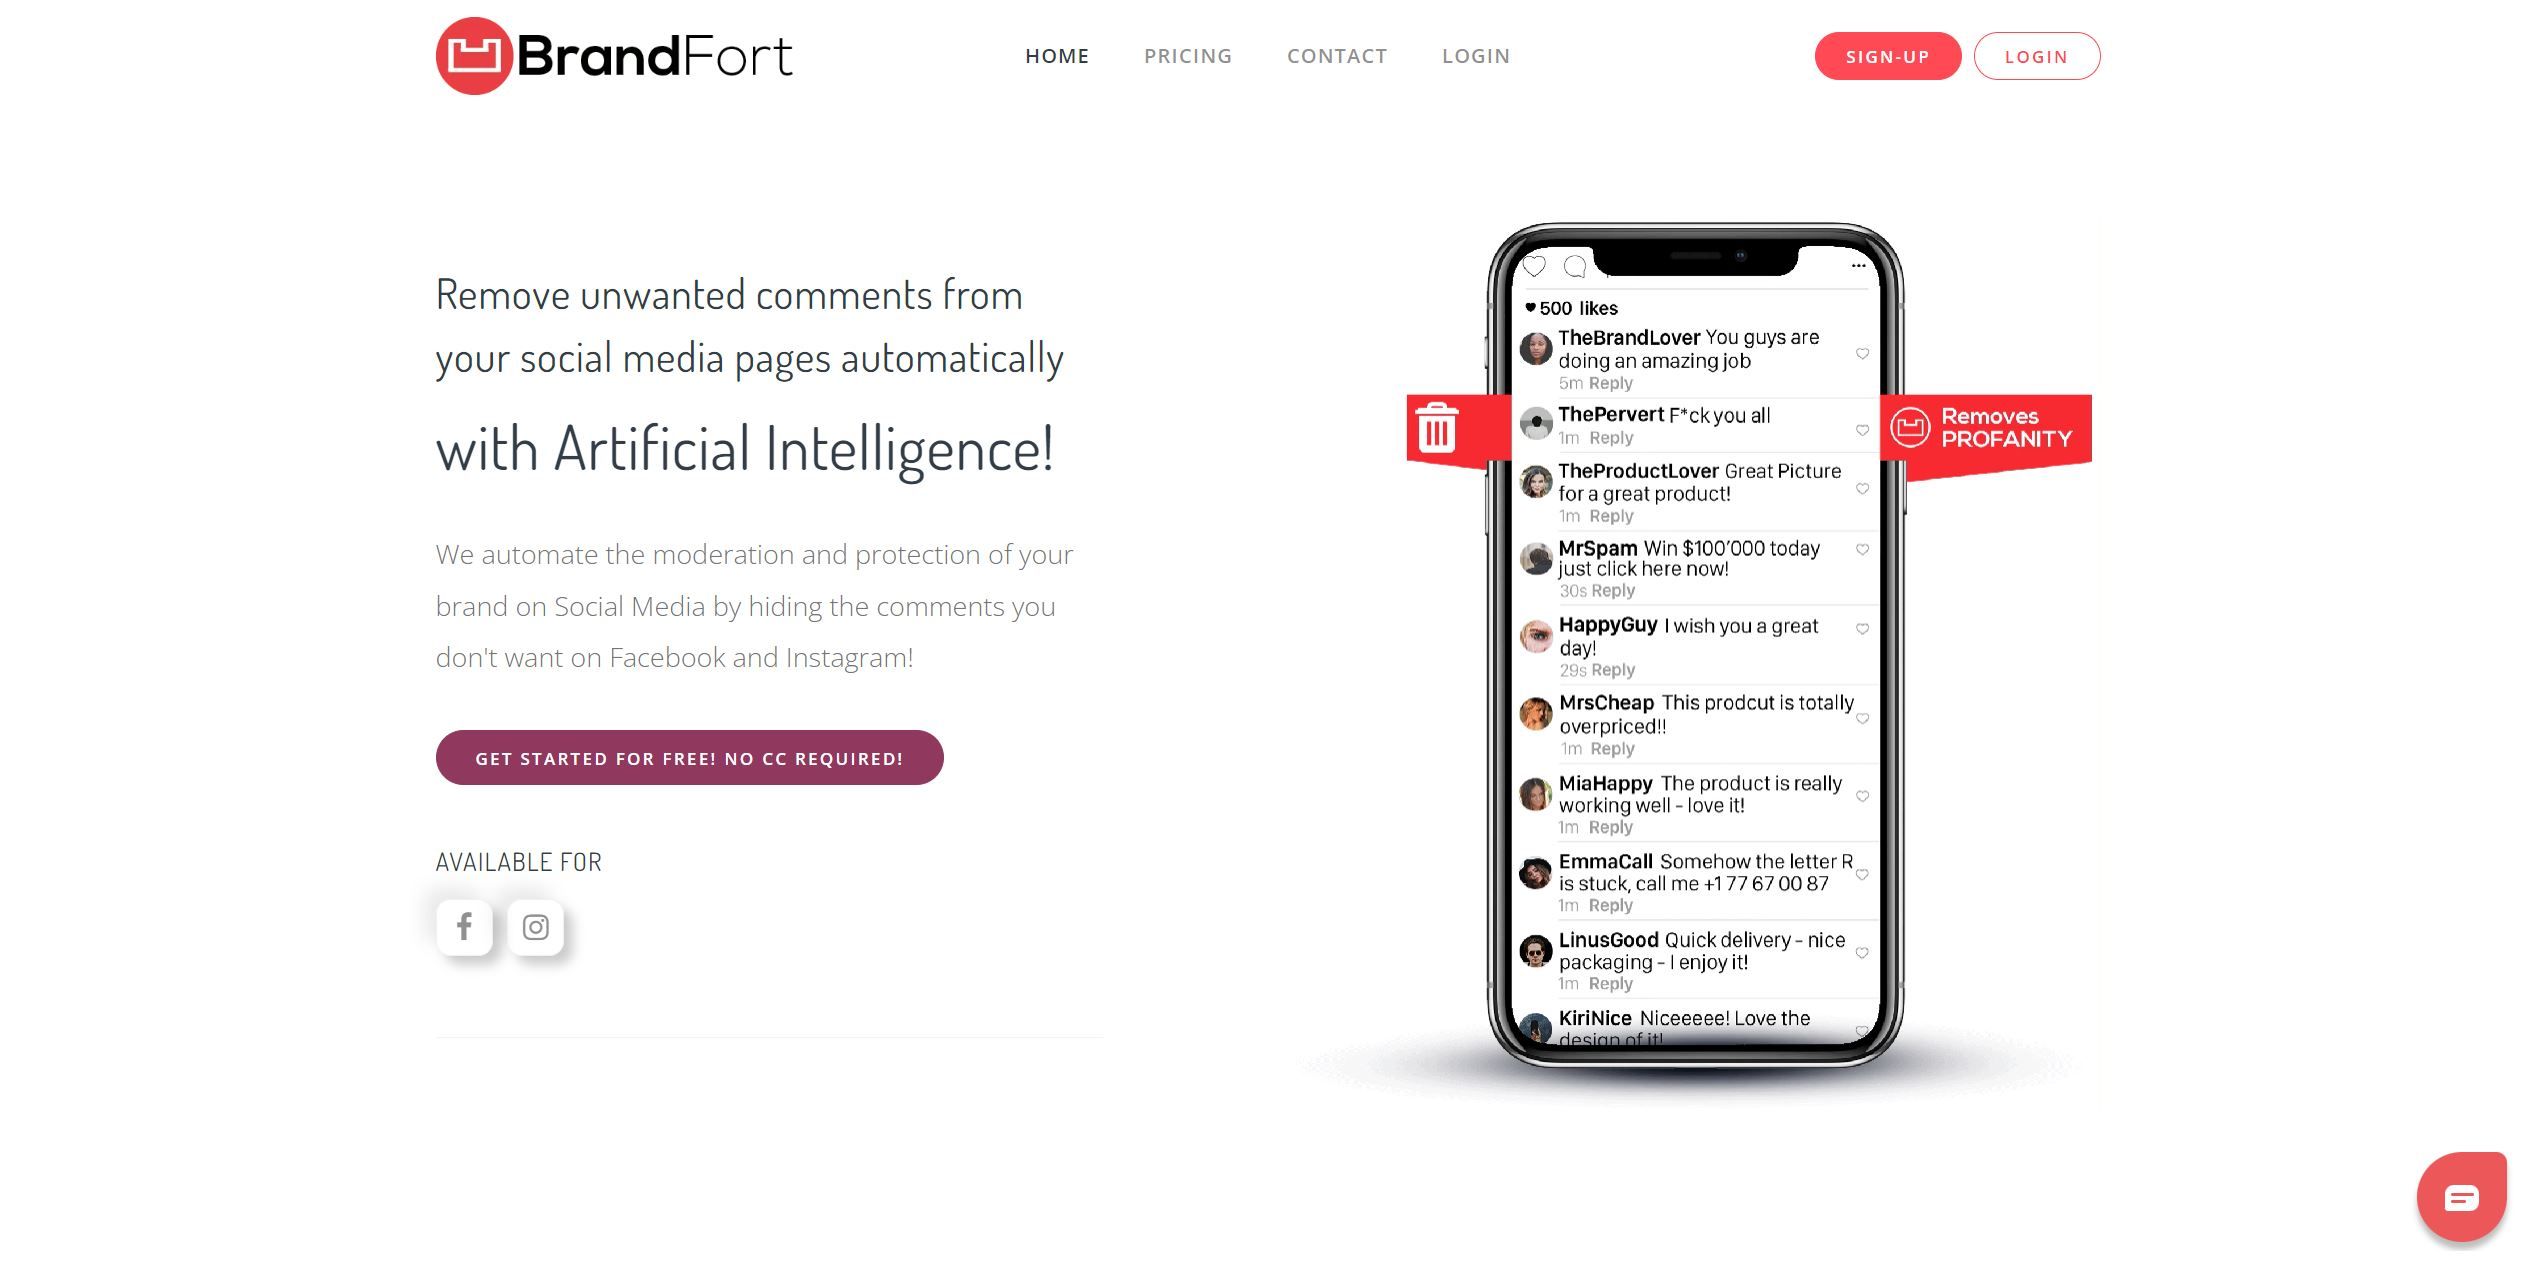 BrandfortBrandfortco protects brand reputation on social media with innovative tools